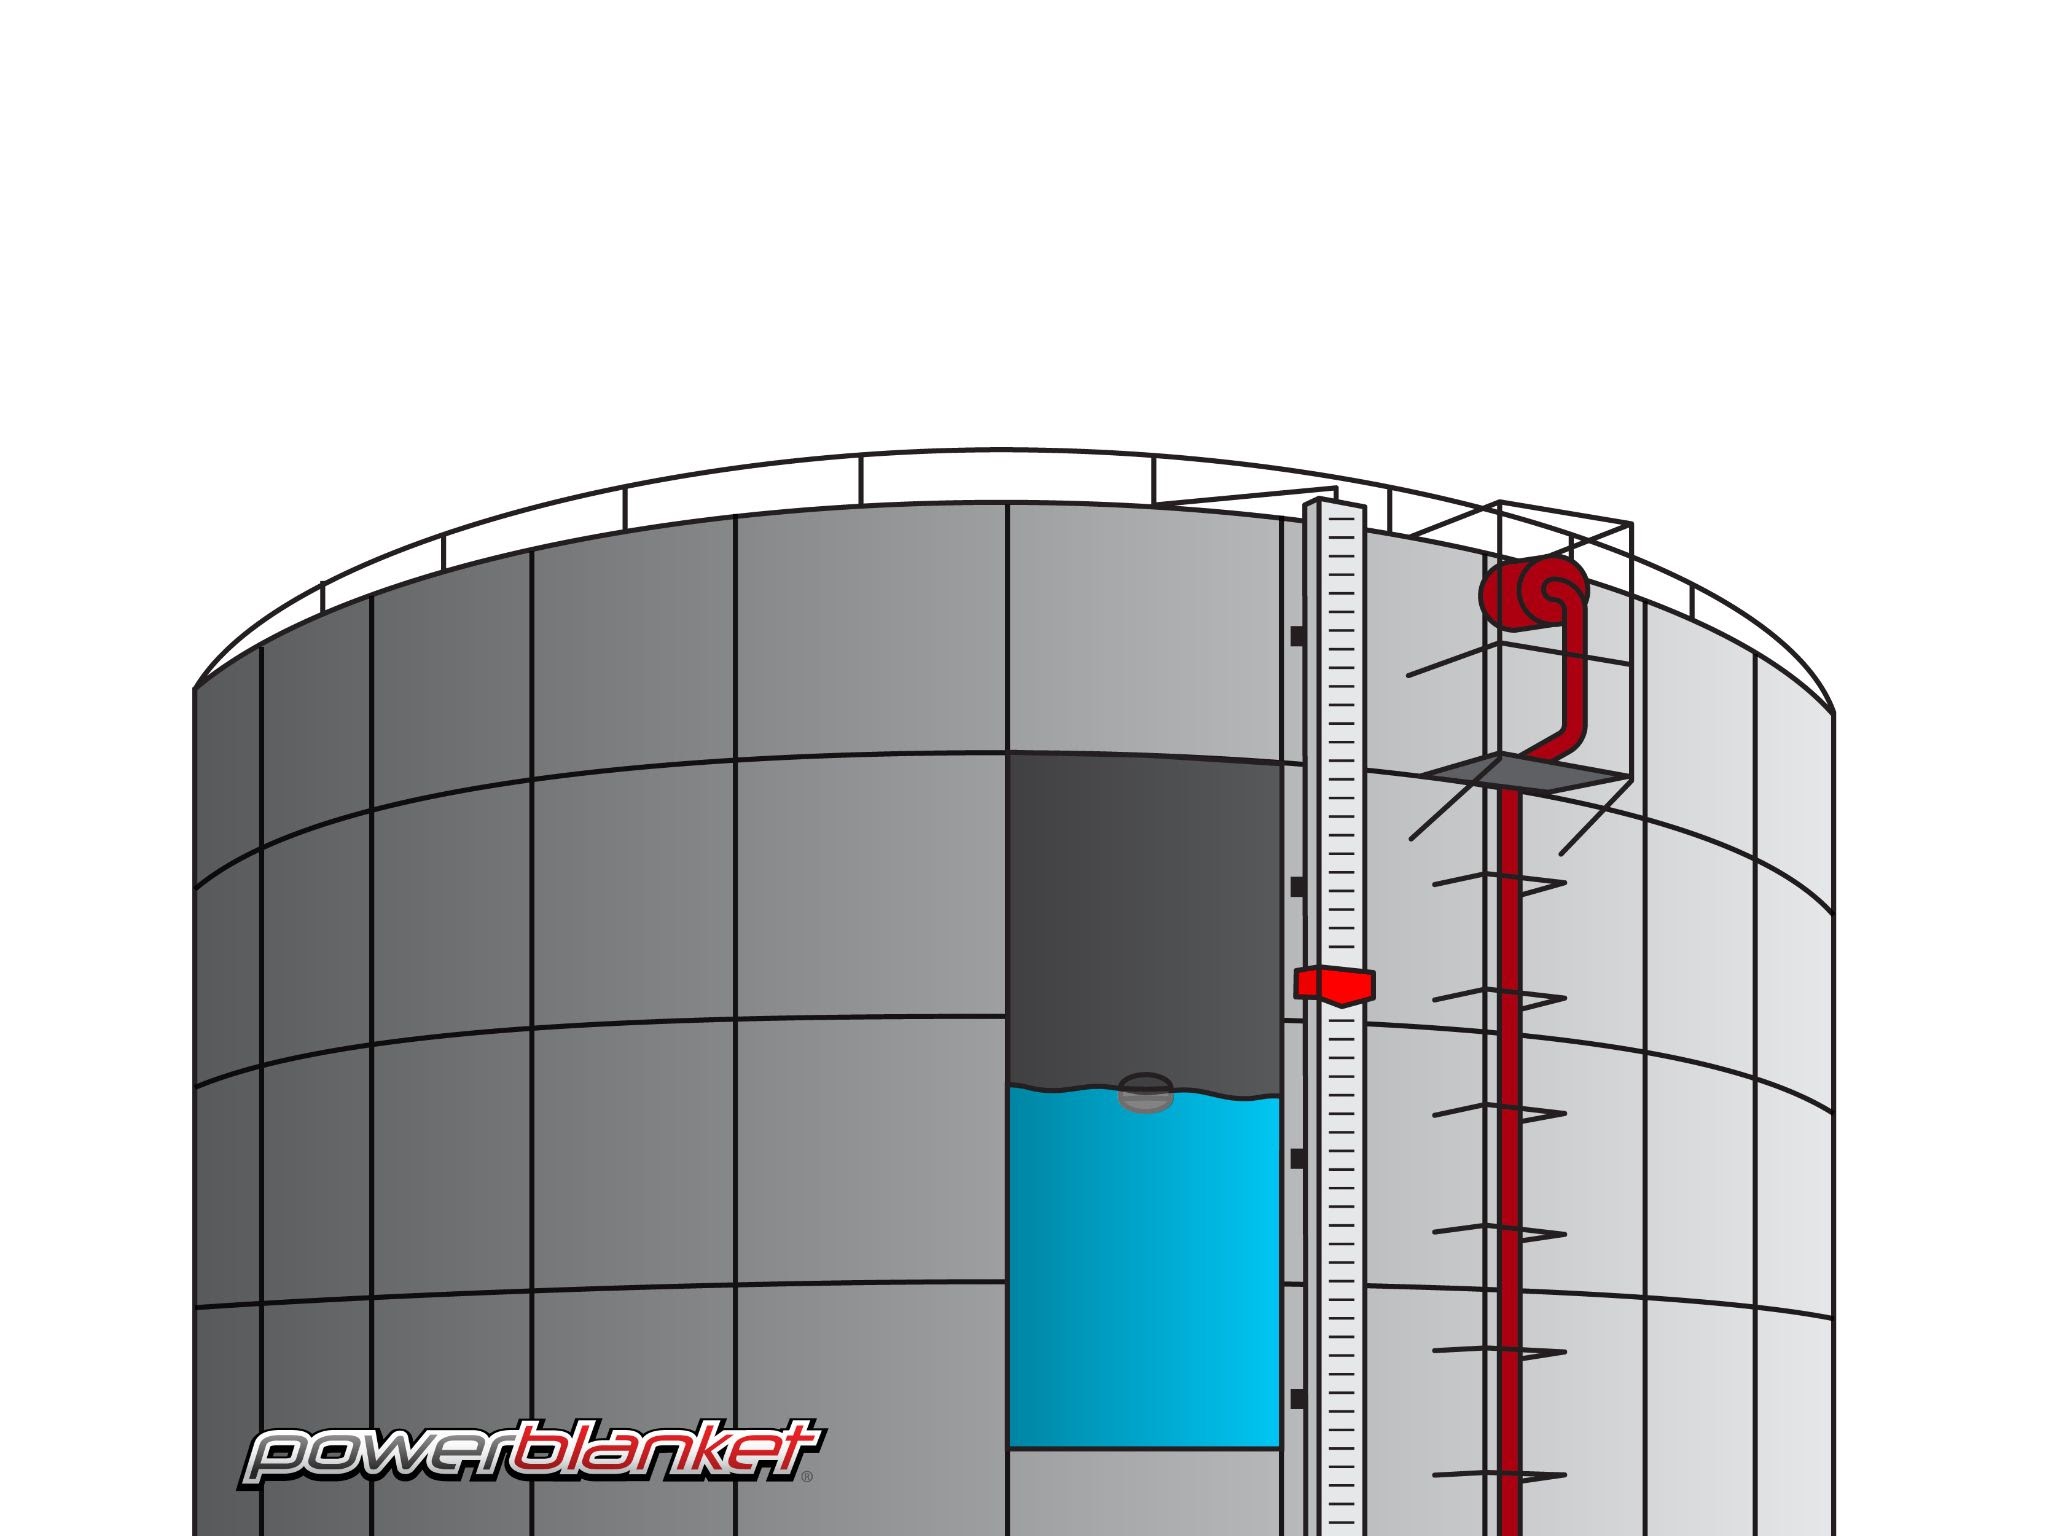 Designing Storage Tanks With Heaters in Mind